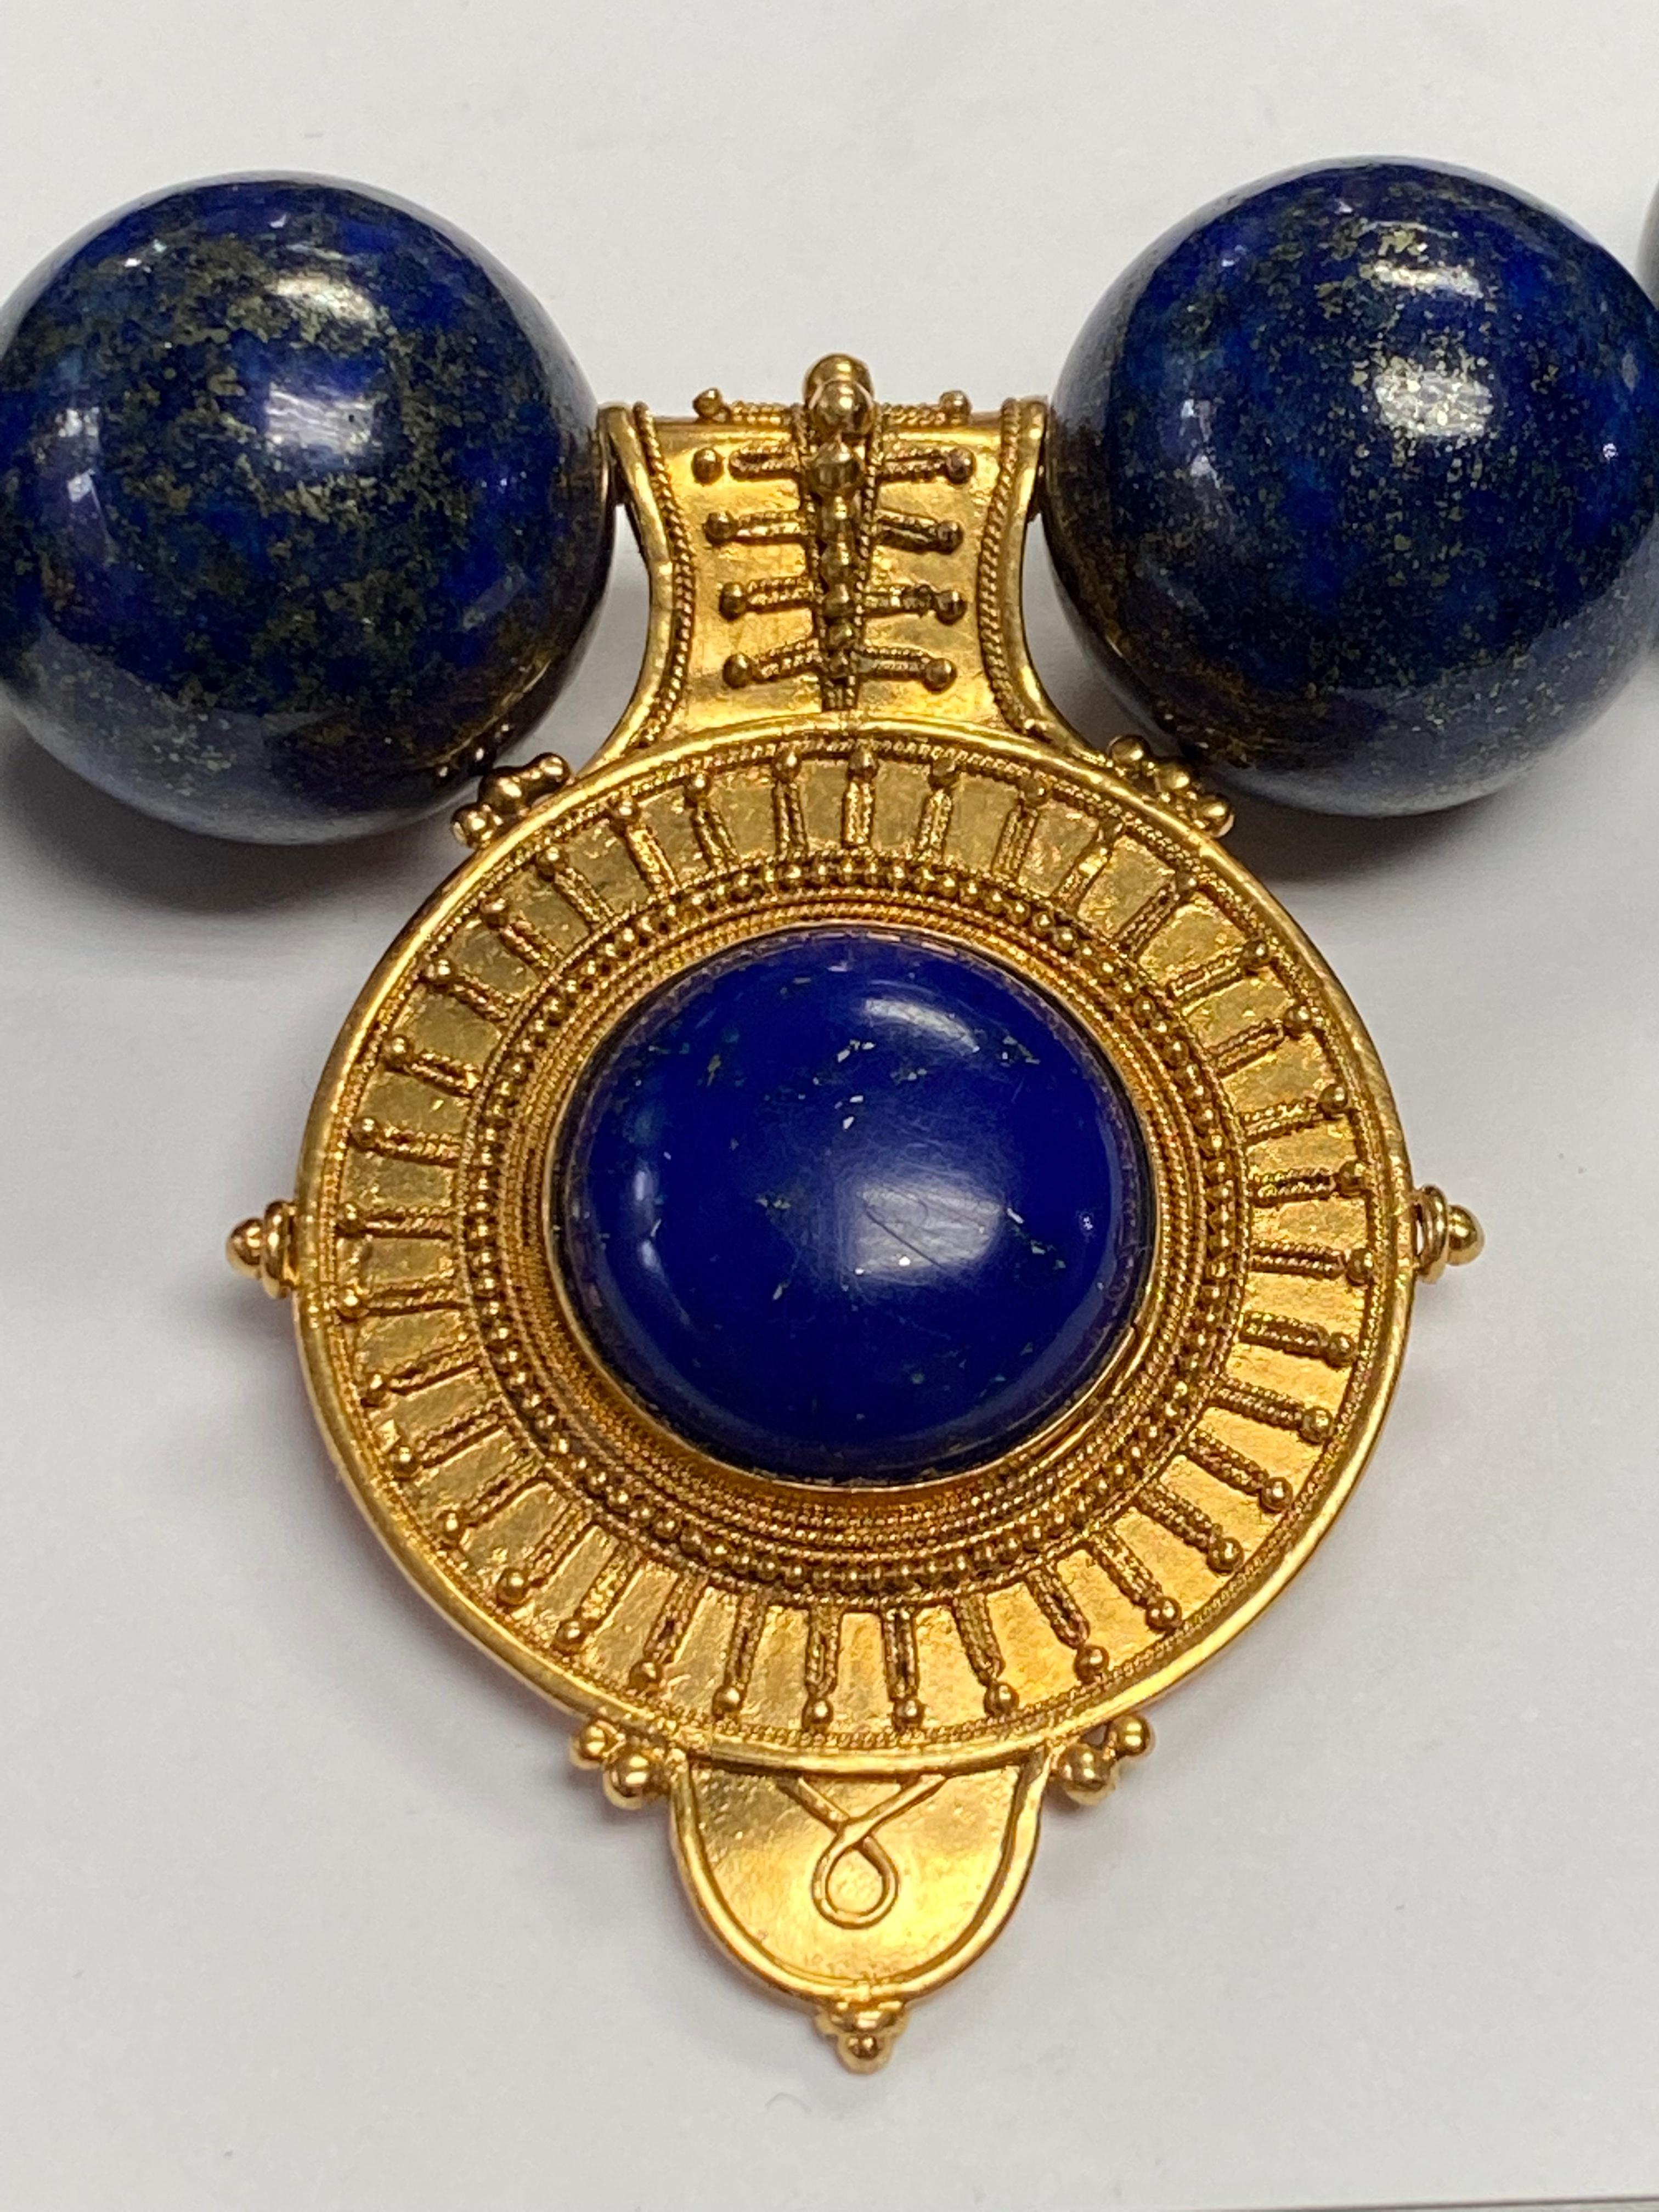 Etruscan style 18kt yellow gold bulla centered by a low dome cobalt blue cabochon lapis. The gold granulation was hand applied, each wire and bead one at a time. The process of gold granulation was created in Ancient Mediterranean civilizations.